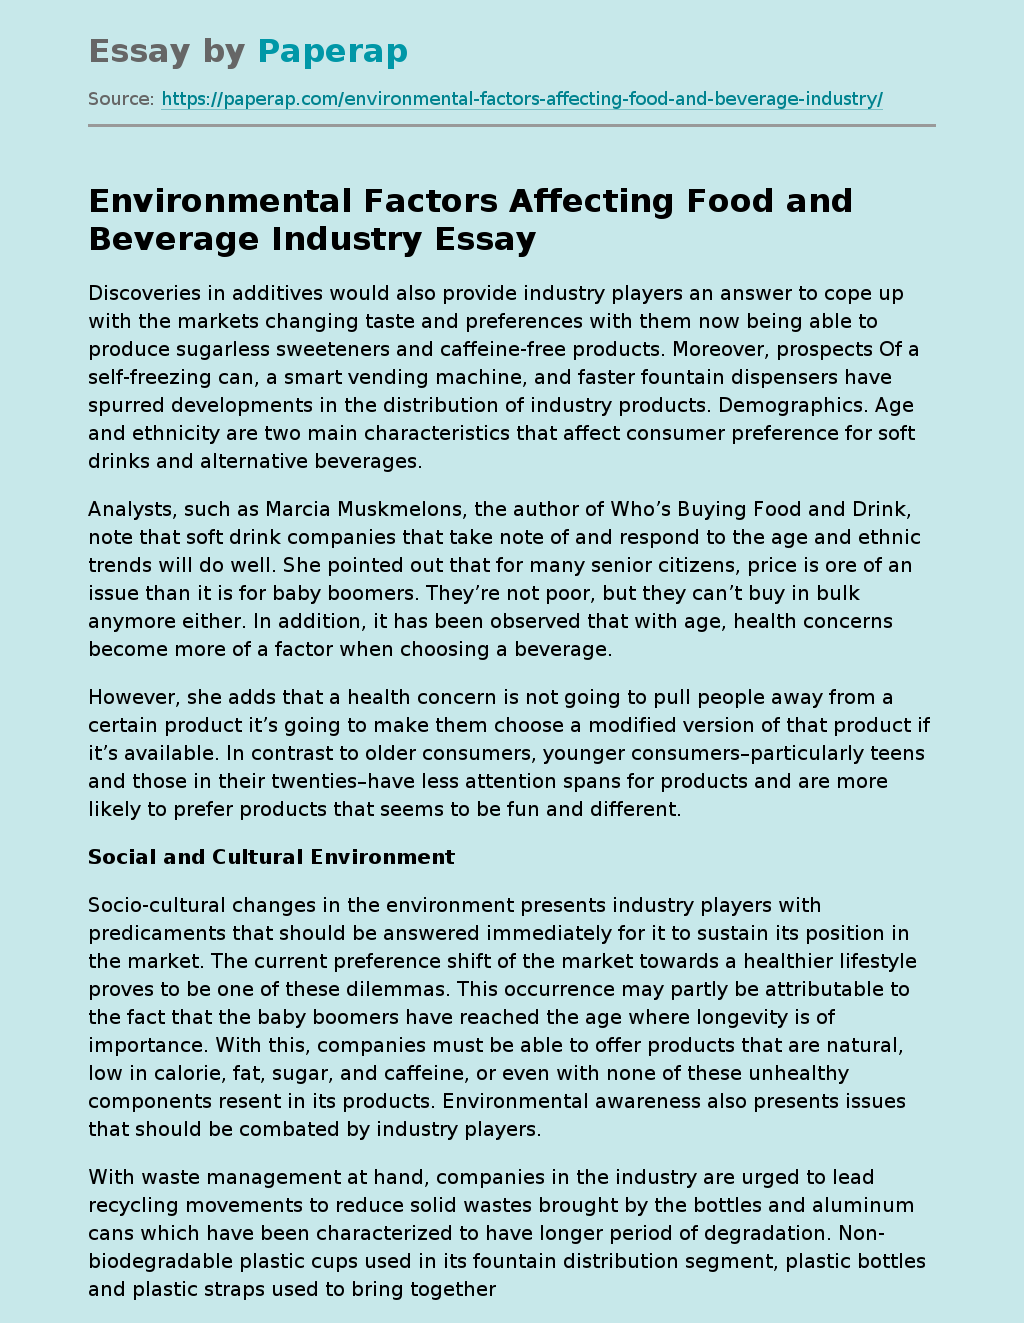 Environmental Factors Affecting Food and Beverage Industry